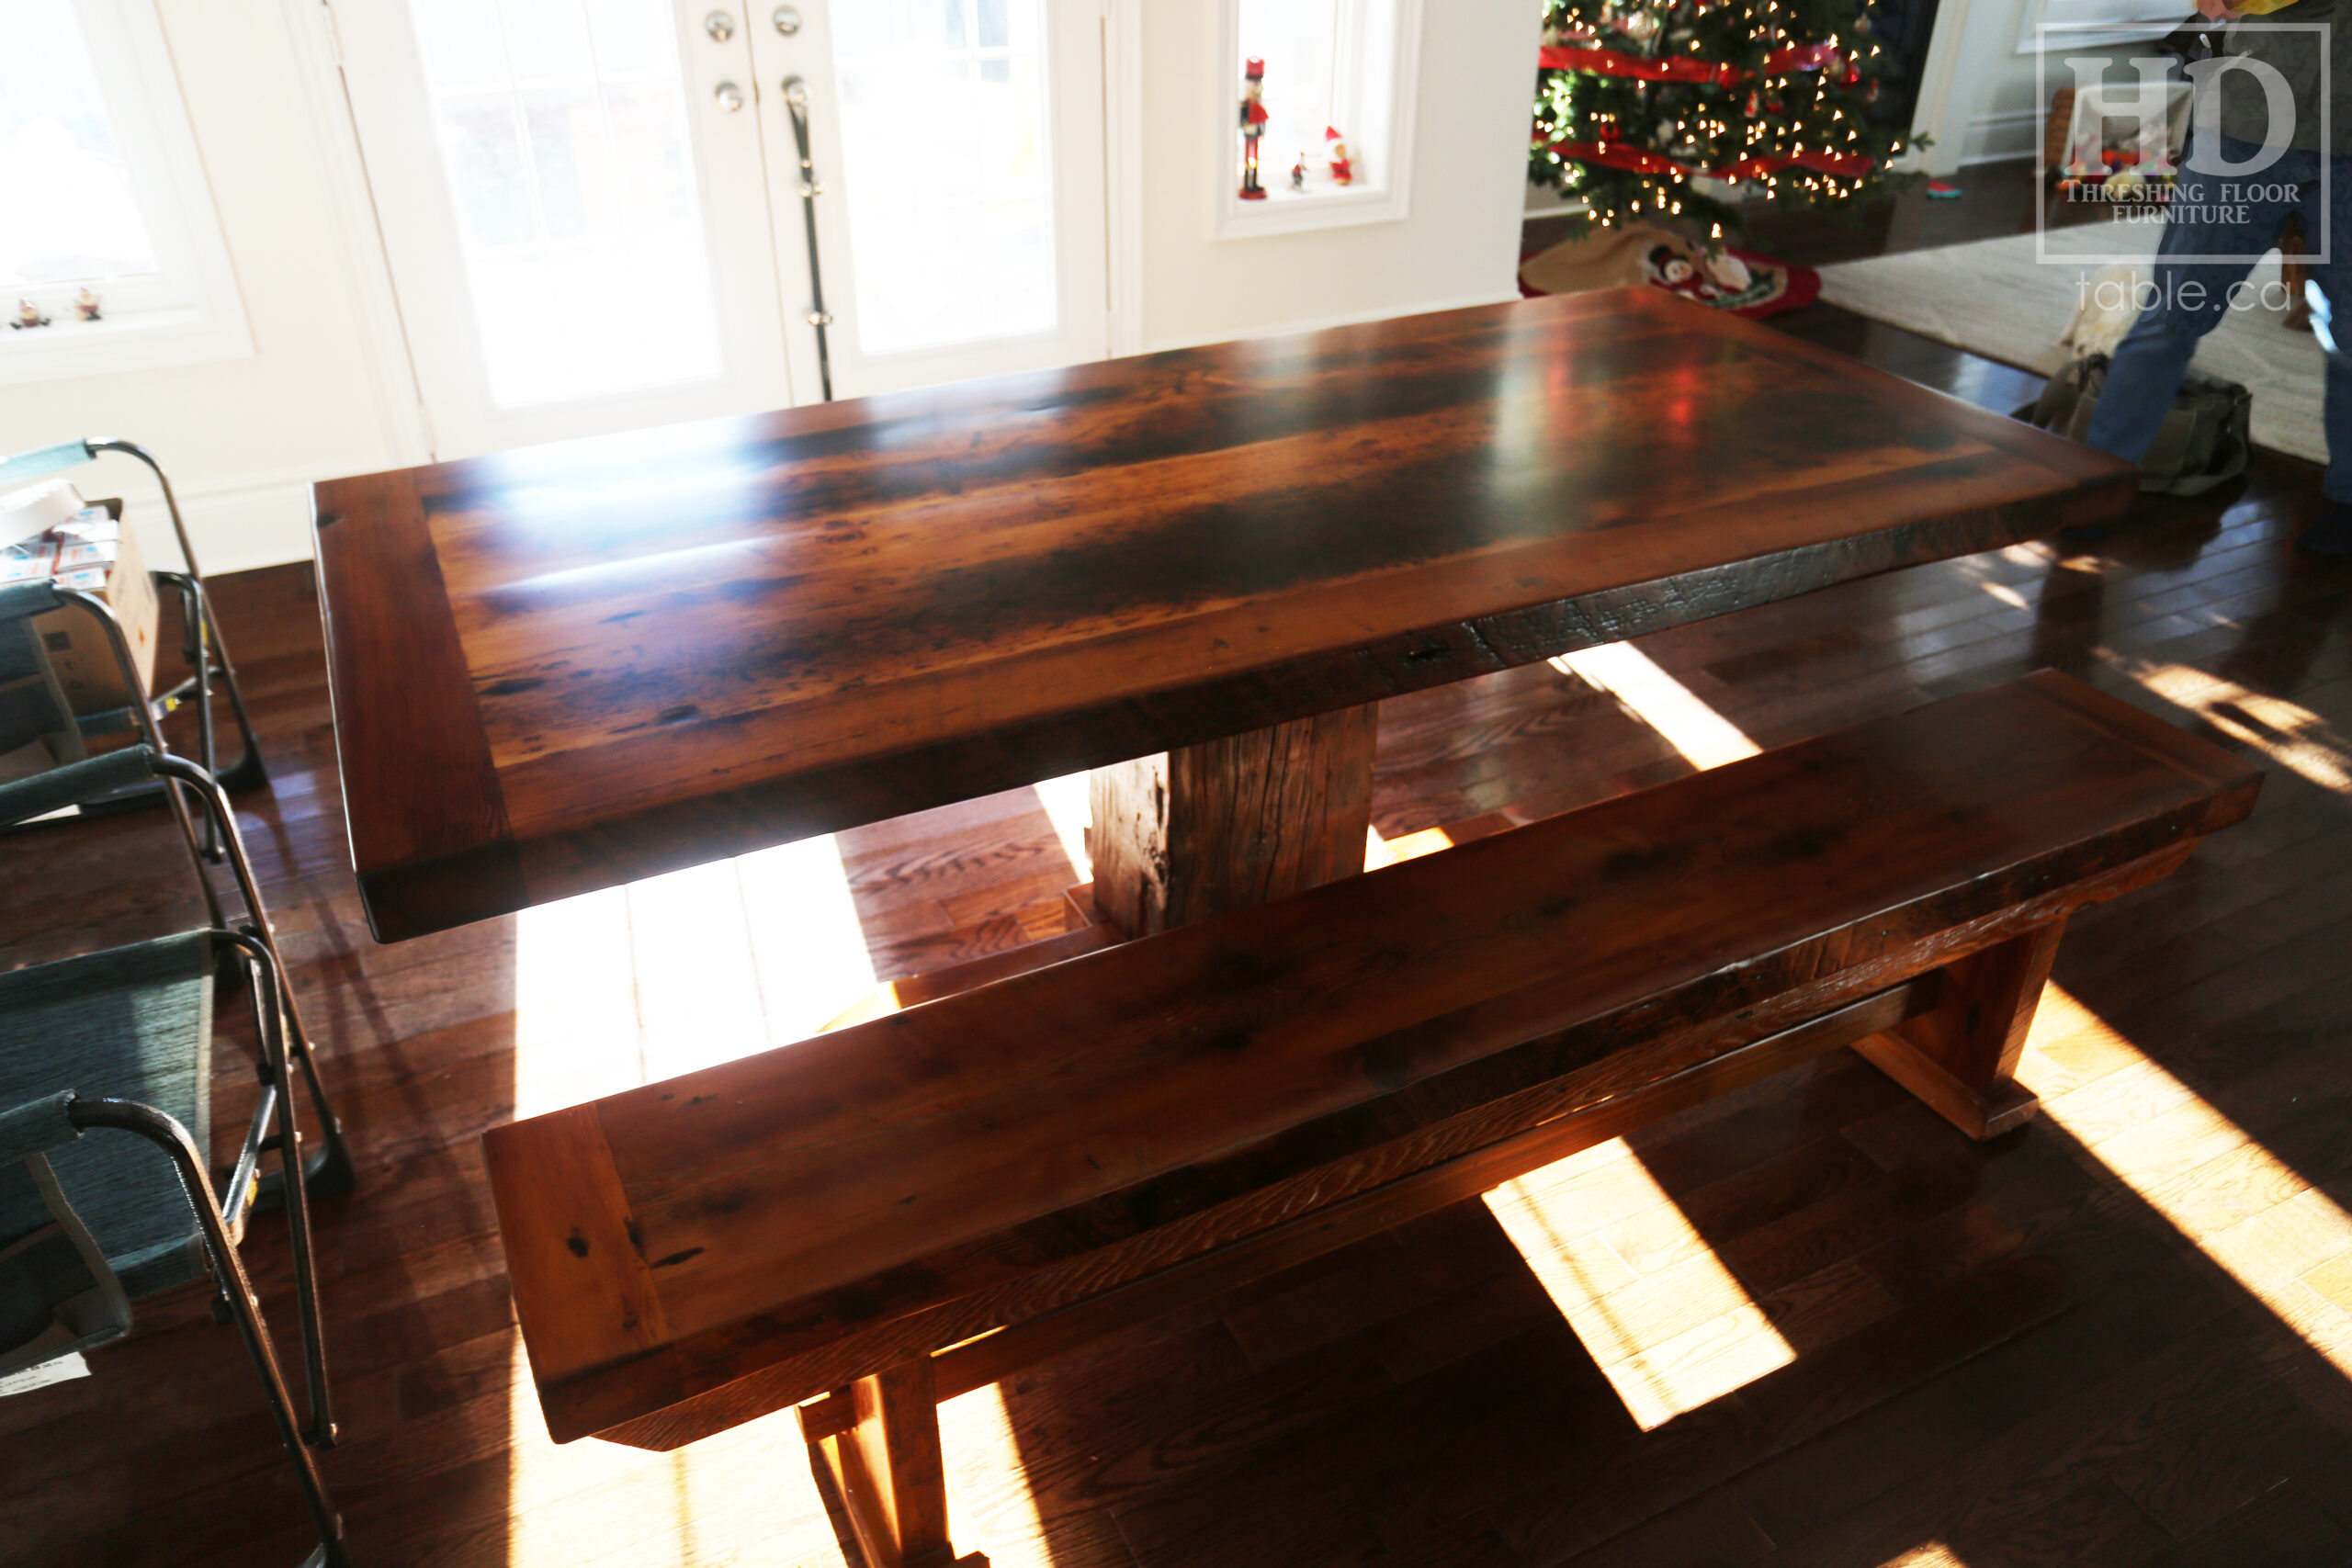 6' Ontario Barnwood Pedestal Table we made for a Barrie Ontario Home - 36" wide - Extra thick 3" Joist Material Option Top - Hand Hewn Beam Pedestal Post - Hemlock Threshing Floor Construction - Original edges & distressing maintained - Premium epoxy + satin polyurethane finish - [Matching] 6' Bench - / www.table.ca